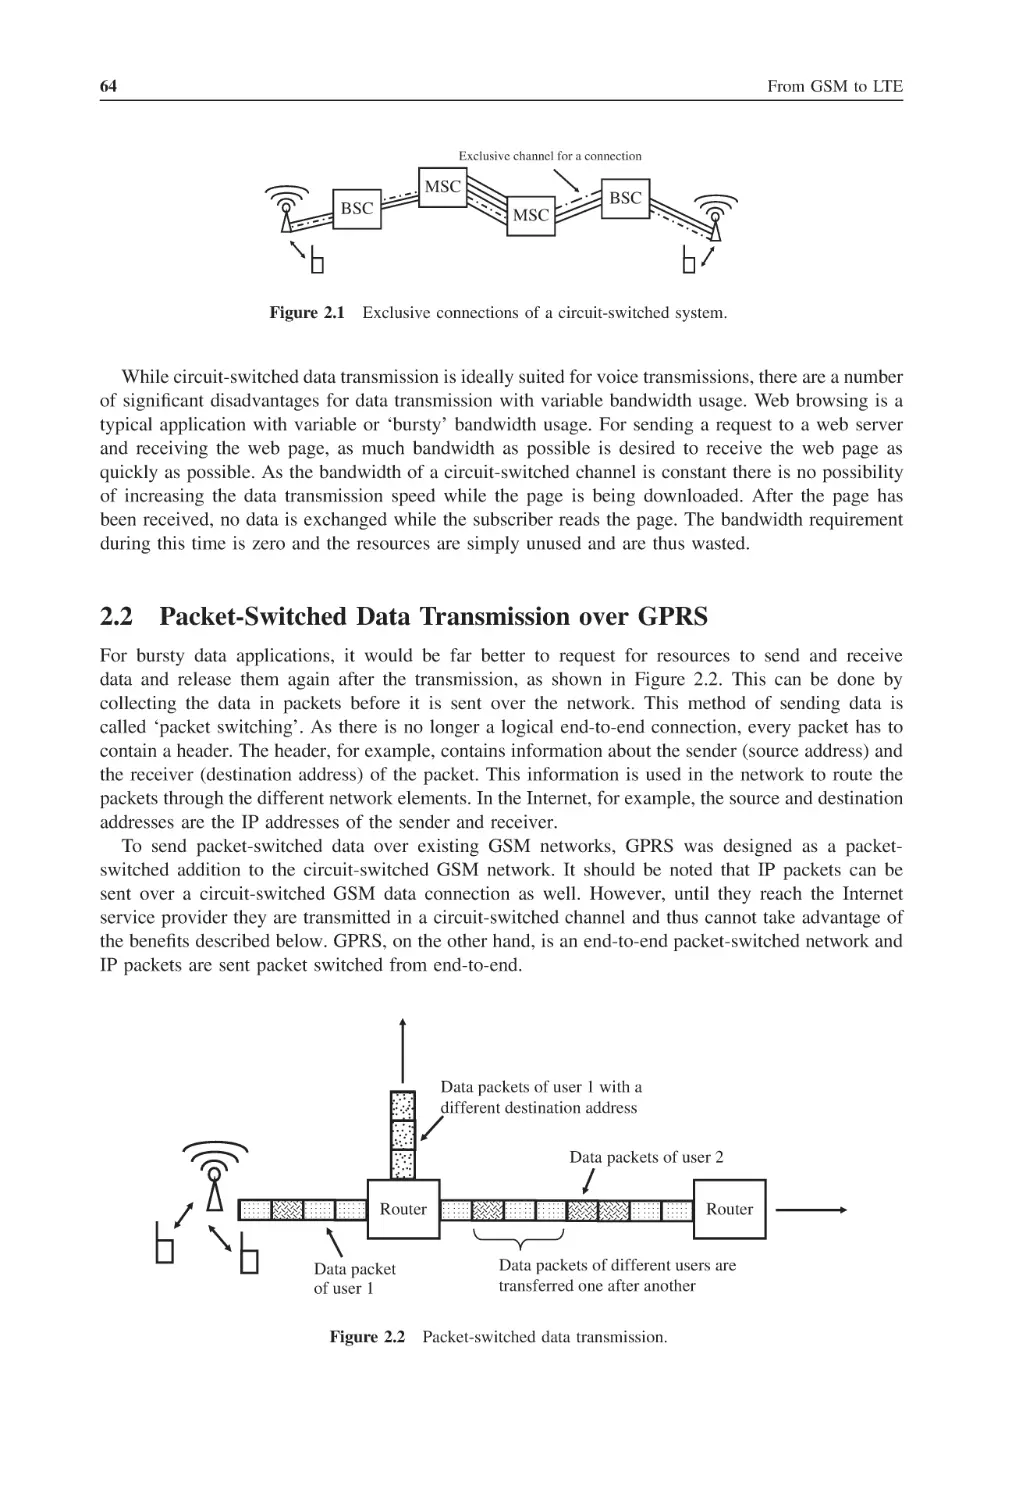 2.2 Packet-Switched Data Transmission over GPRS